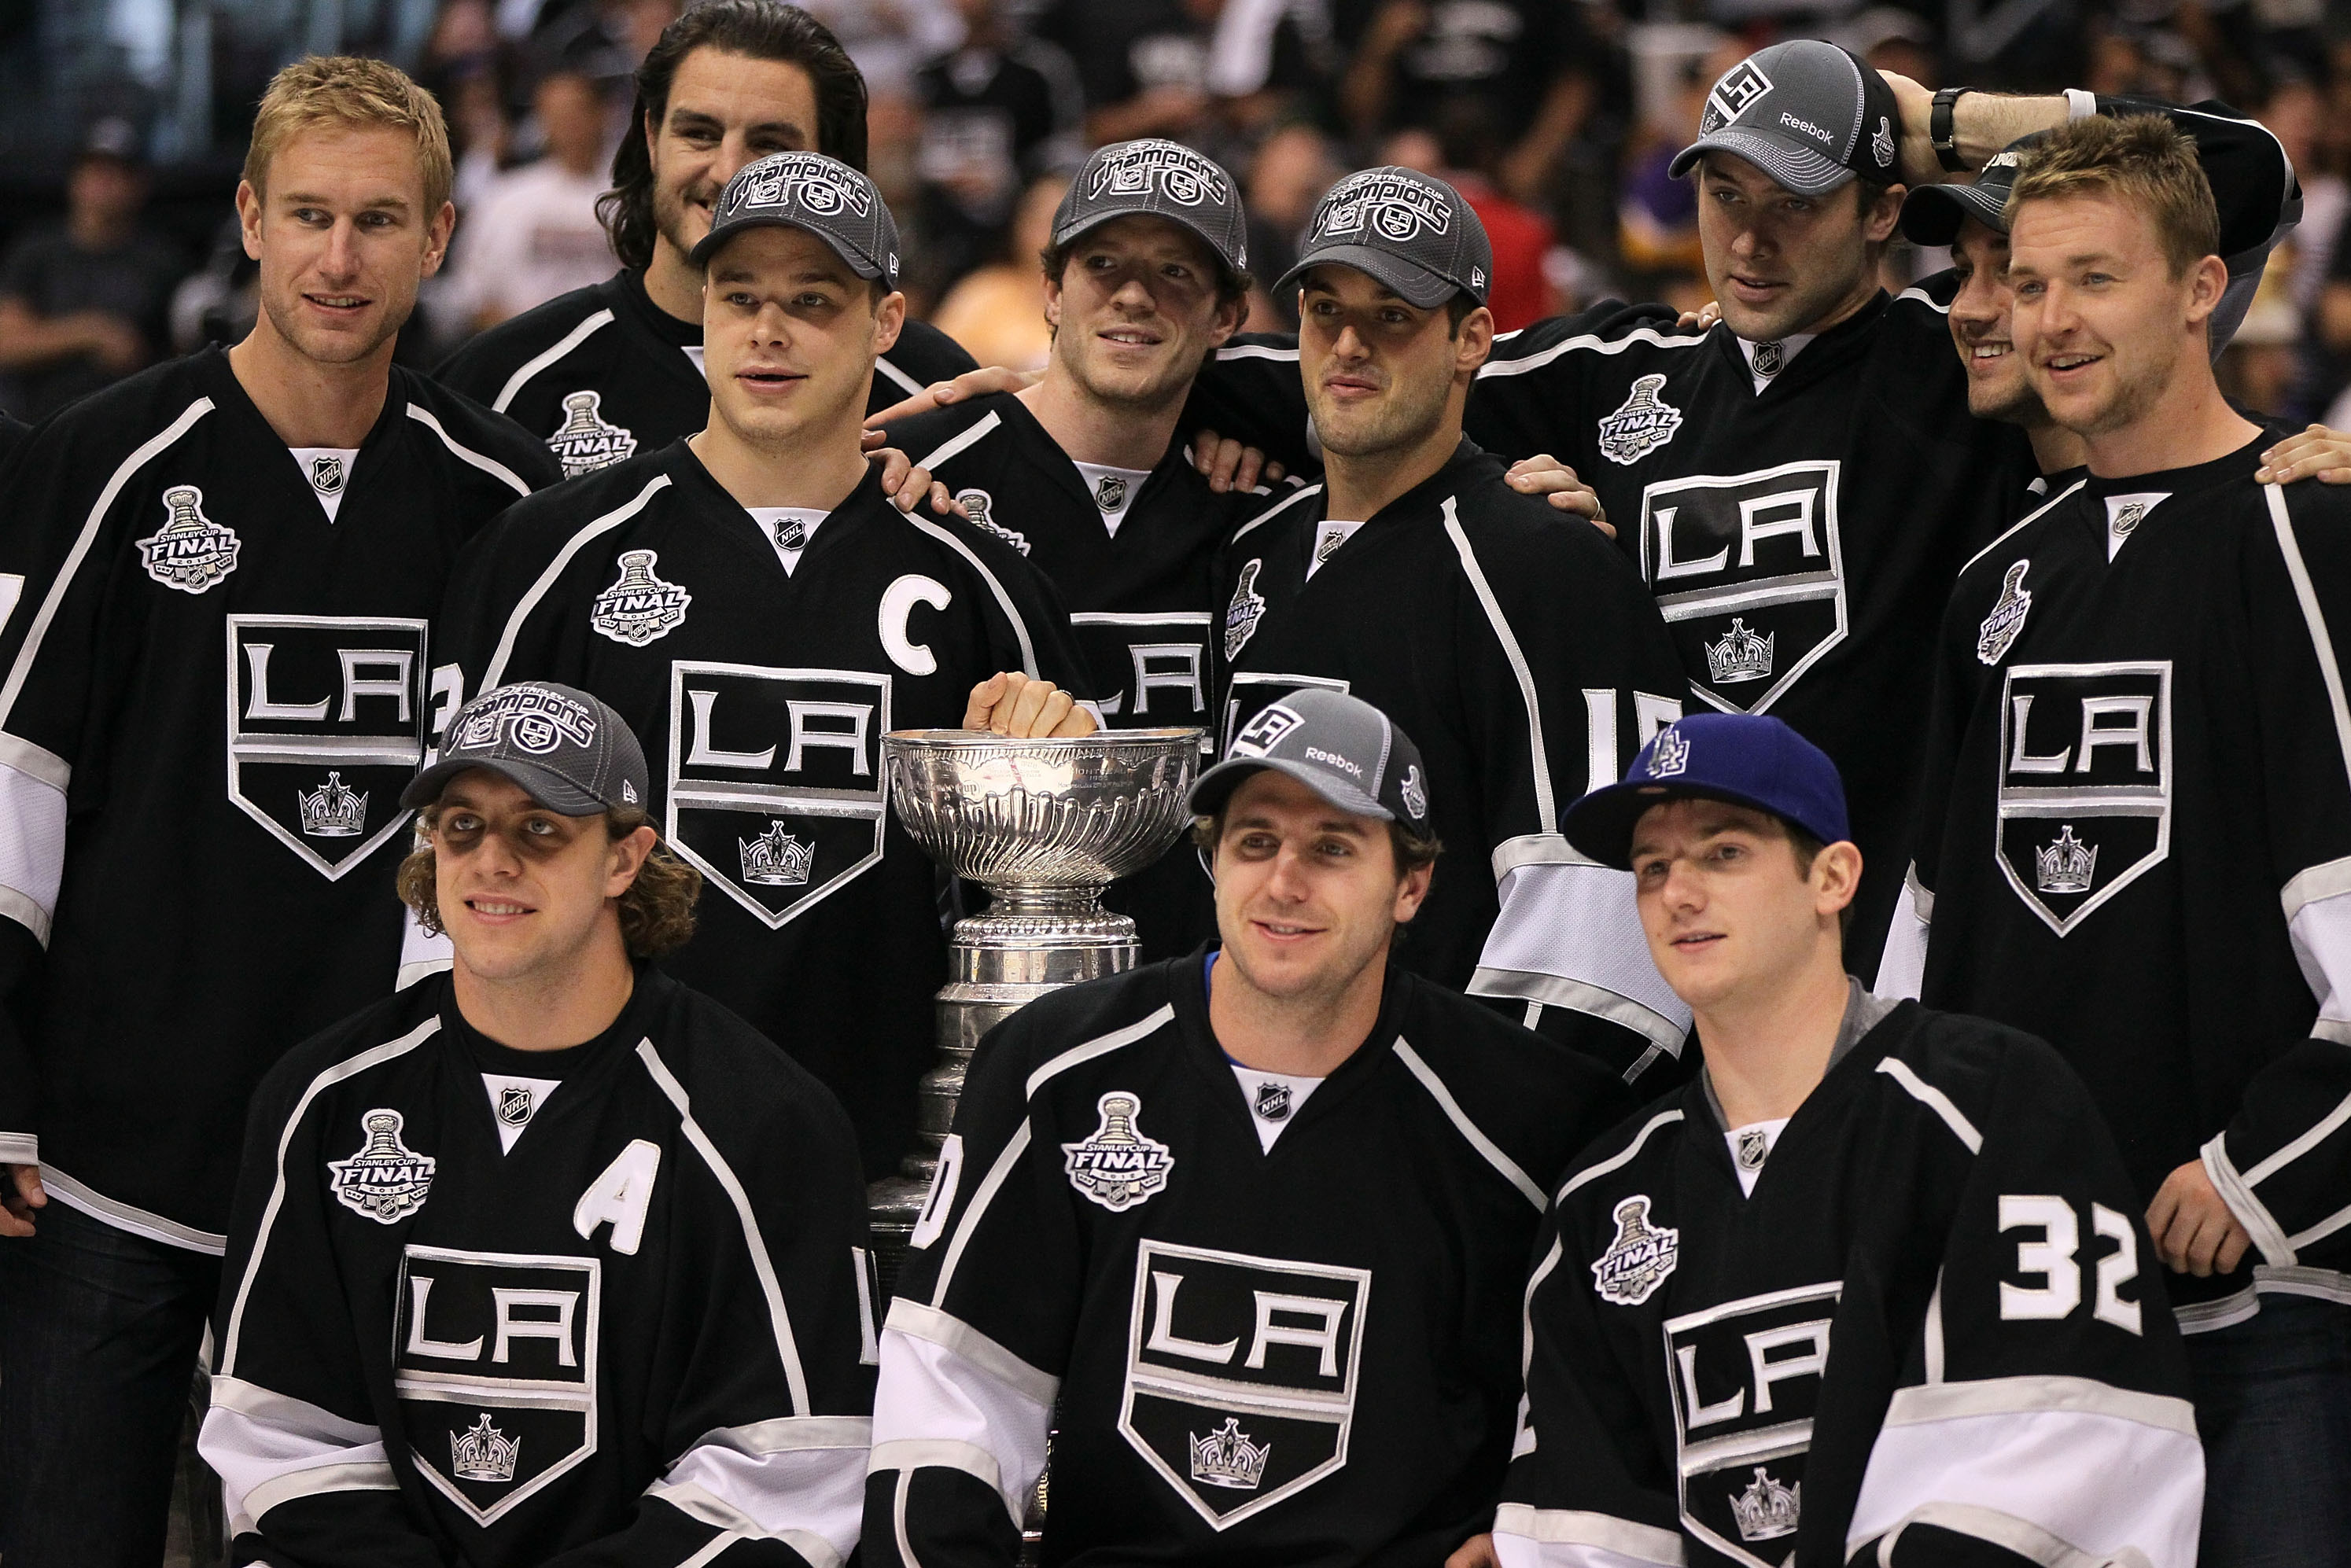 Kings Stanley Cup Championship gear is already being sold in LA